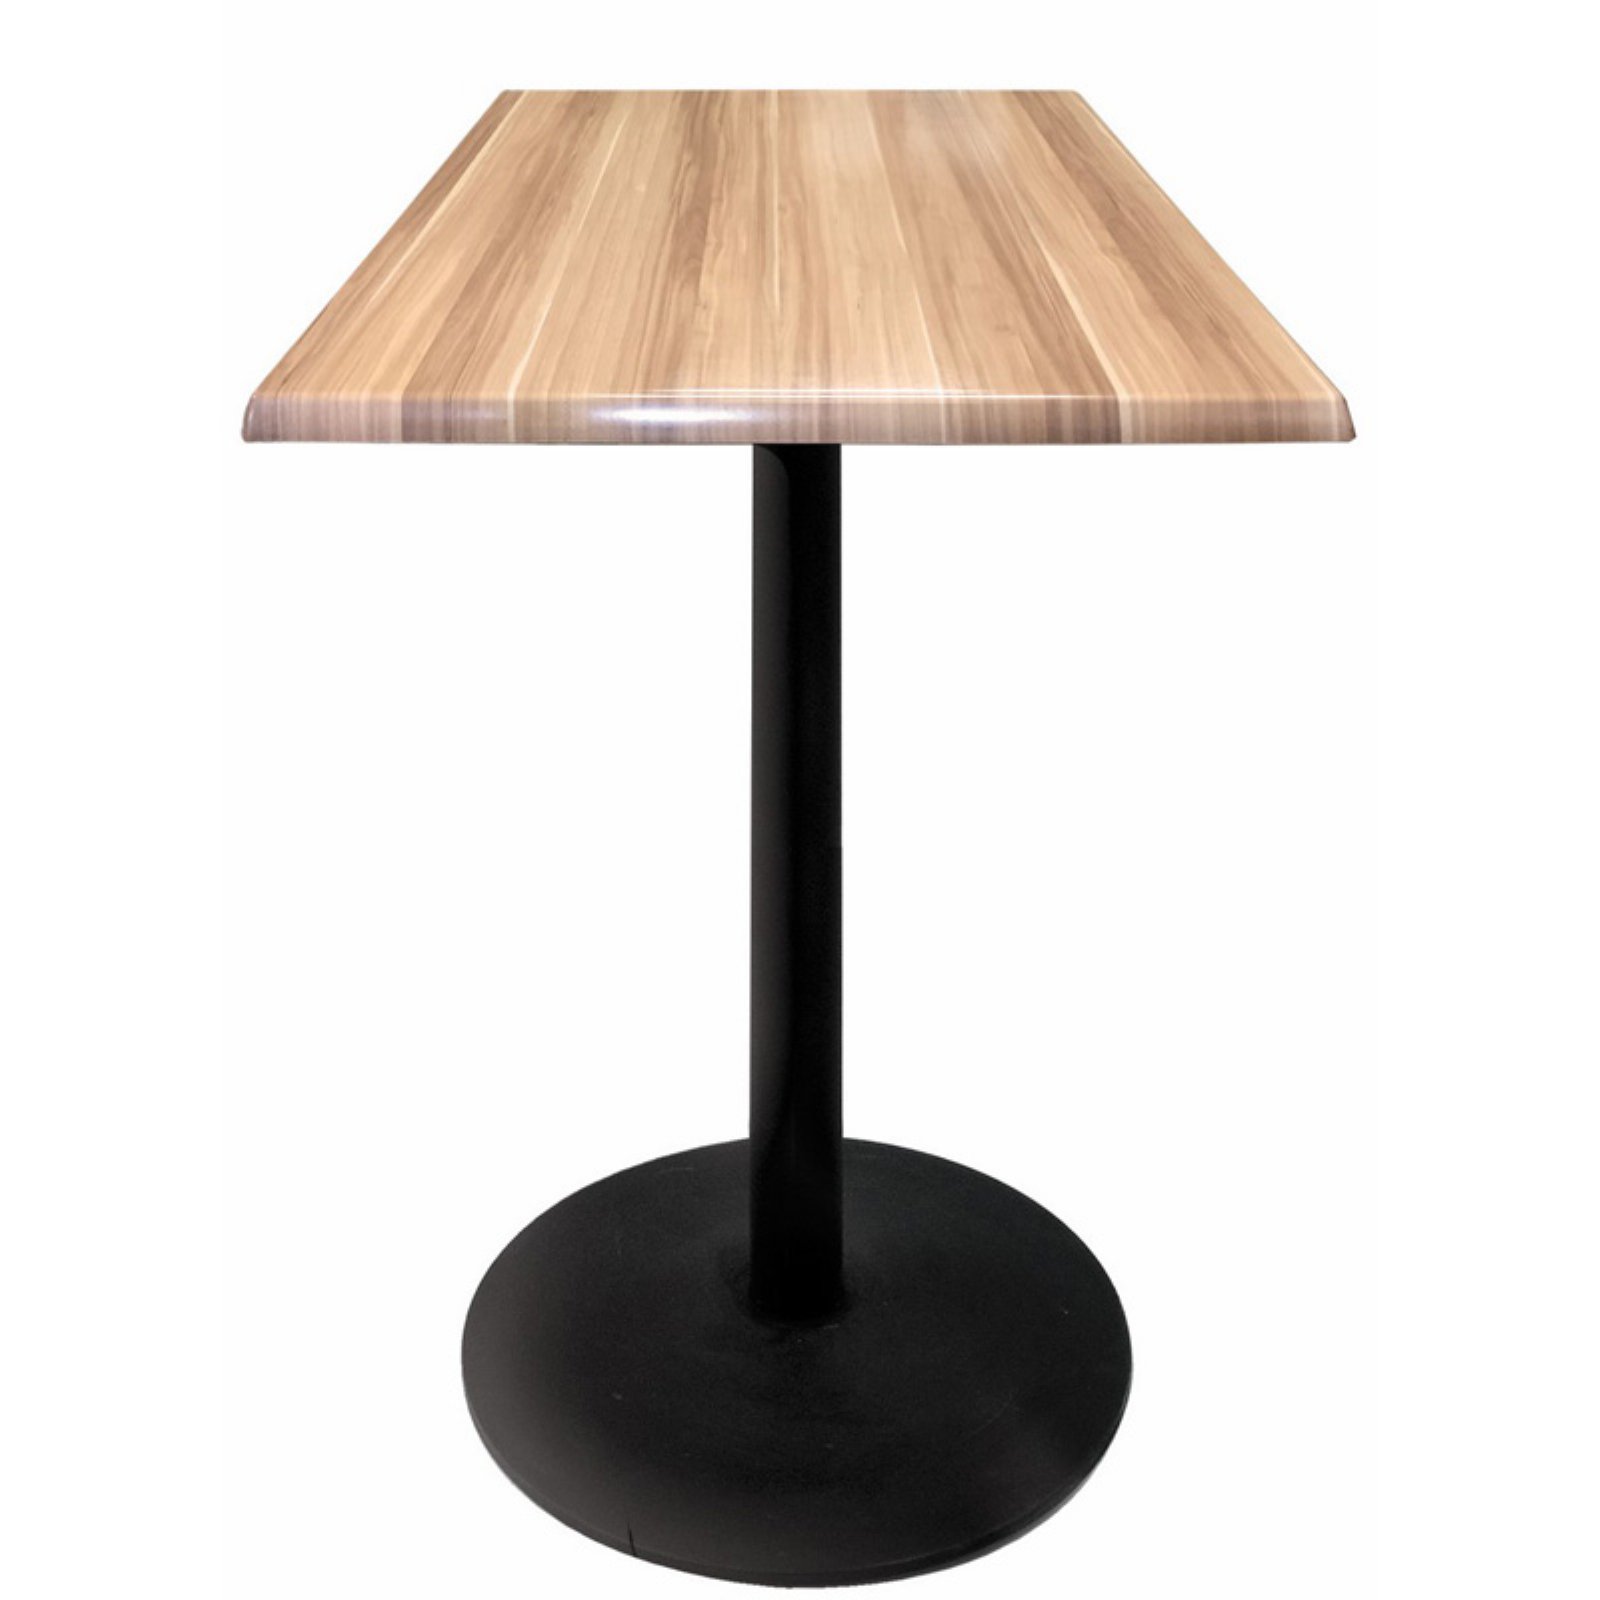 Indoor/Outdoor 30" Tall OD214 Black Table Base with 22" Diameter Foot and 36" x 36" Square Indoor/Outdoor Rustic Top by the Holland Bar Stool Co. - image 4 of 5